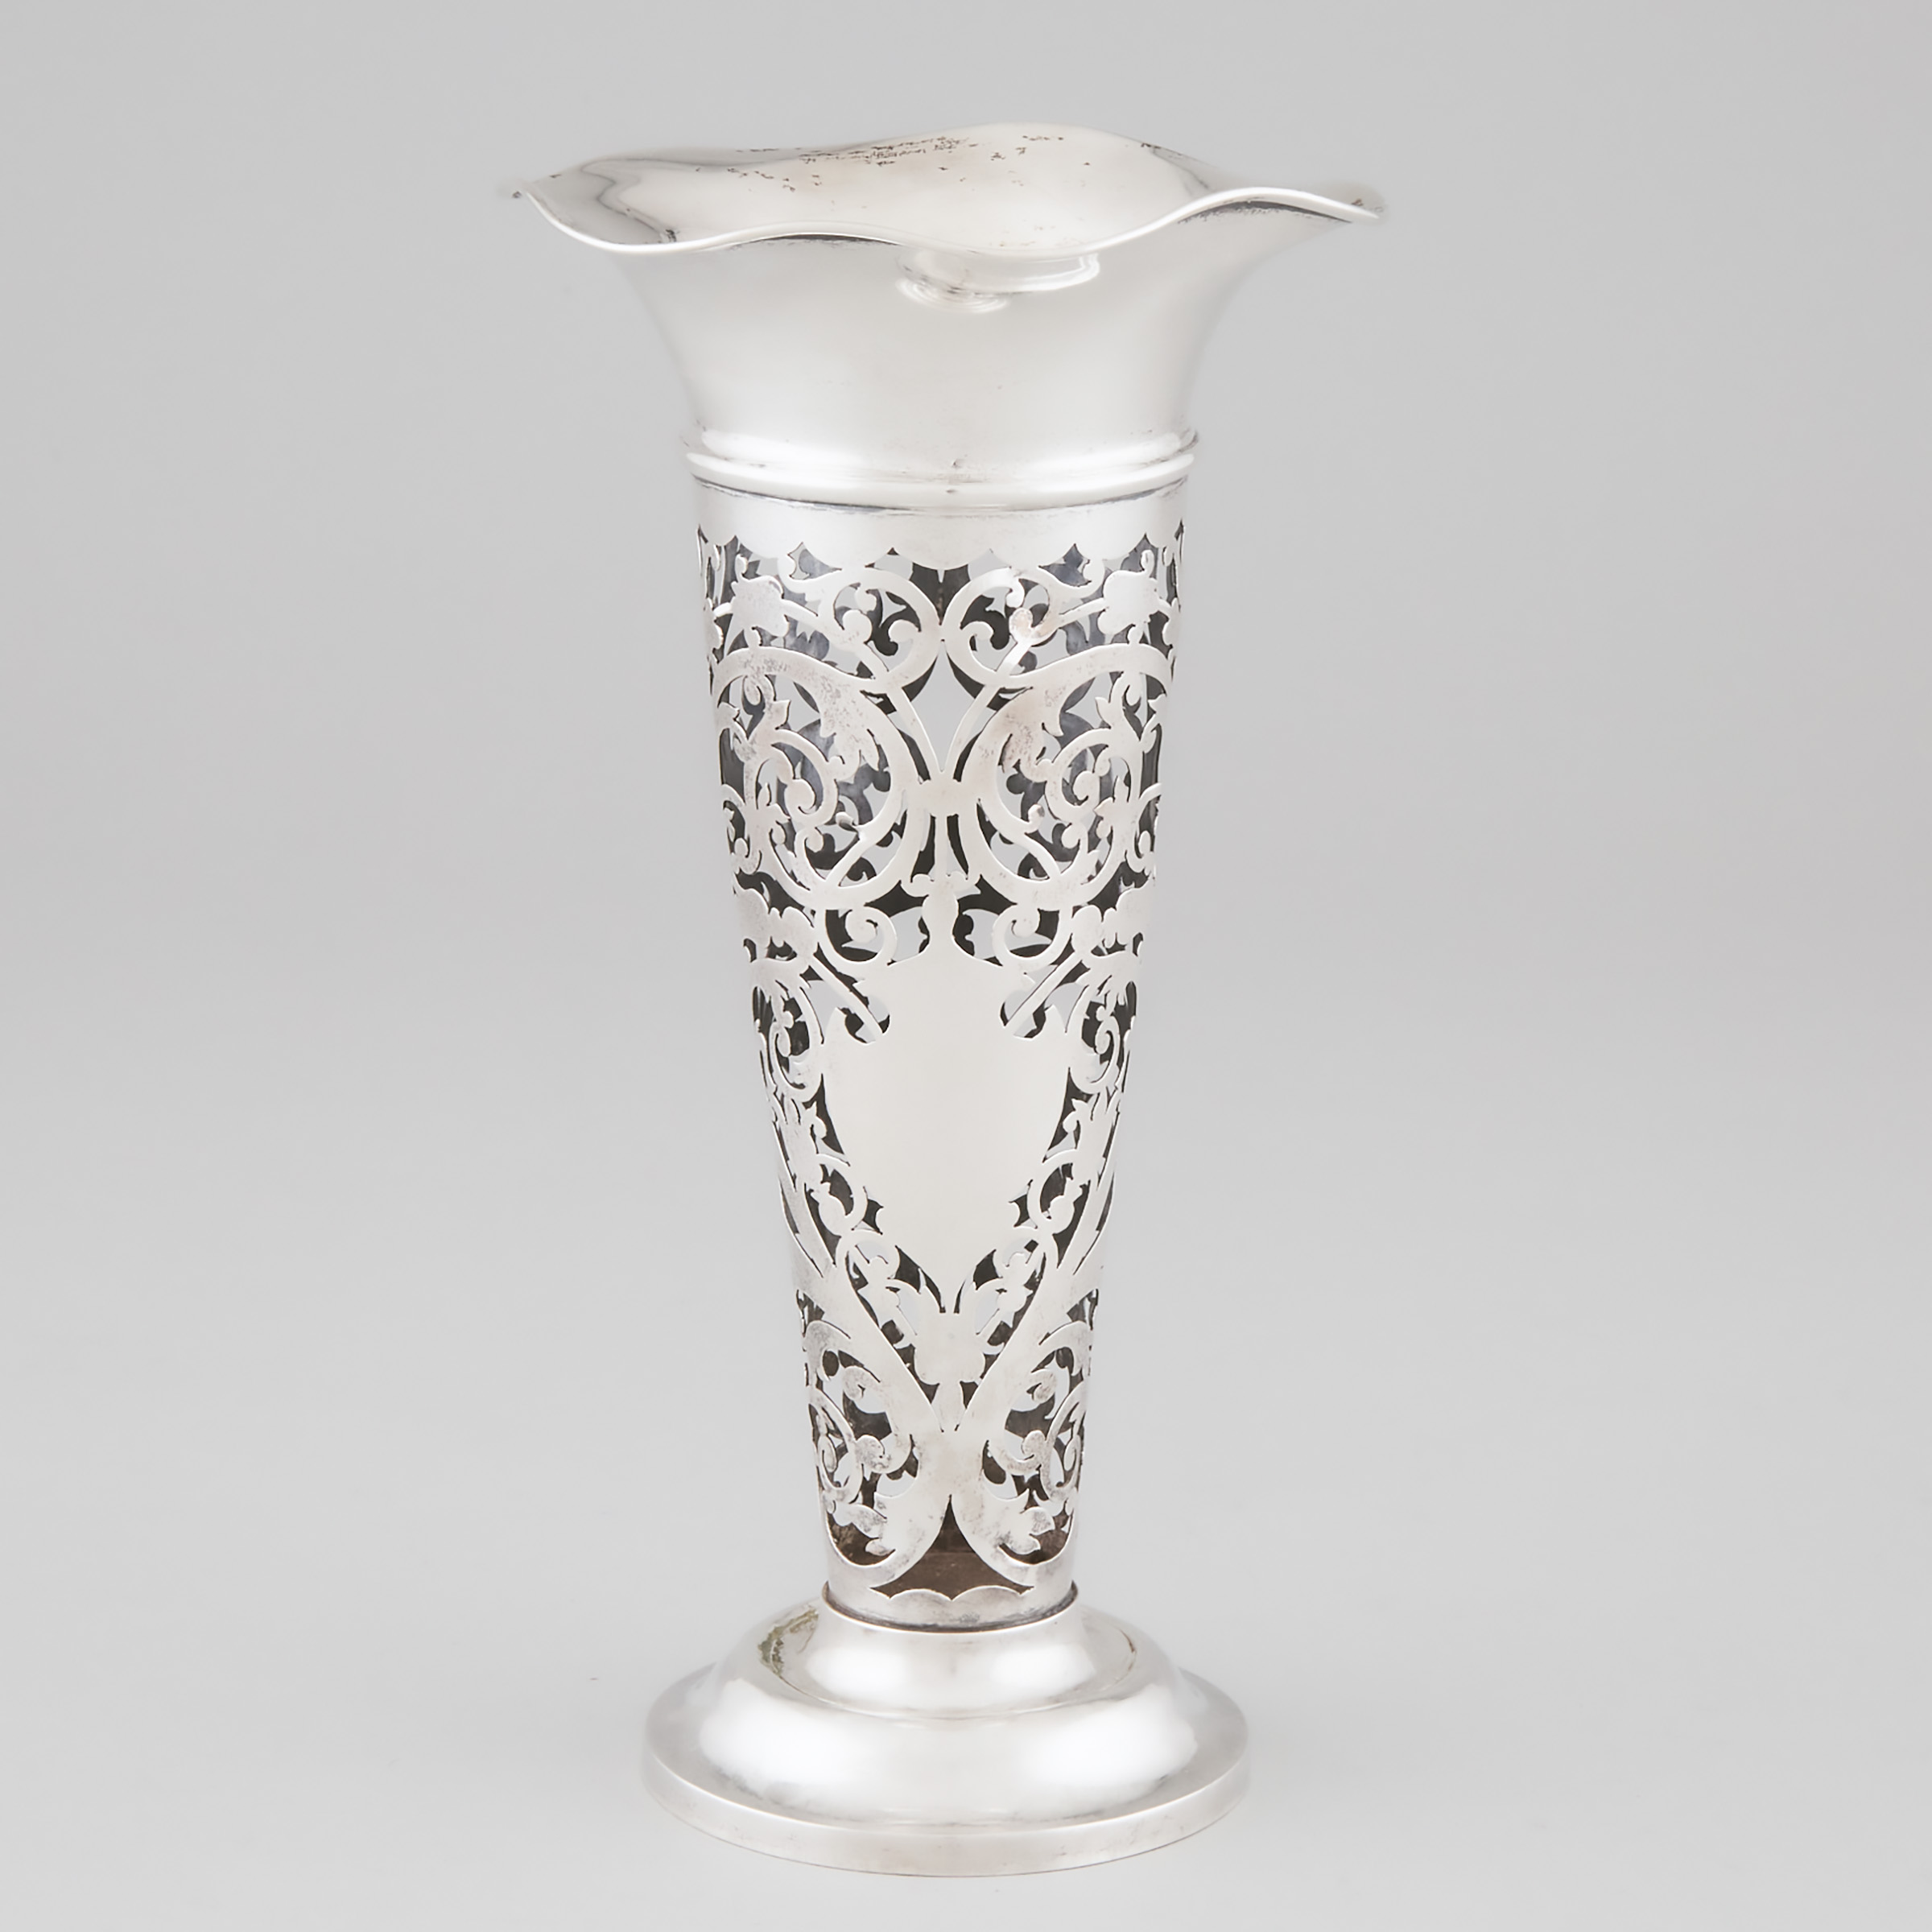 Canadian Silver Pierced Vase, Henry Birks & Sons, Montreal, Que., c.1904-24